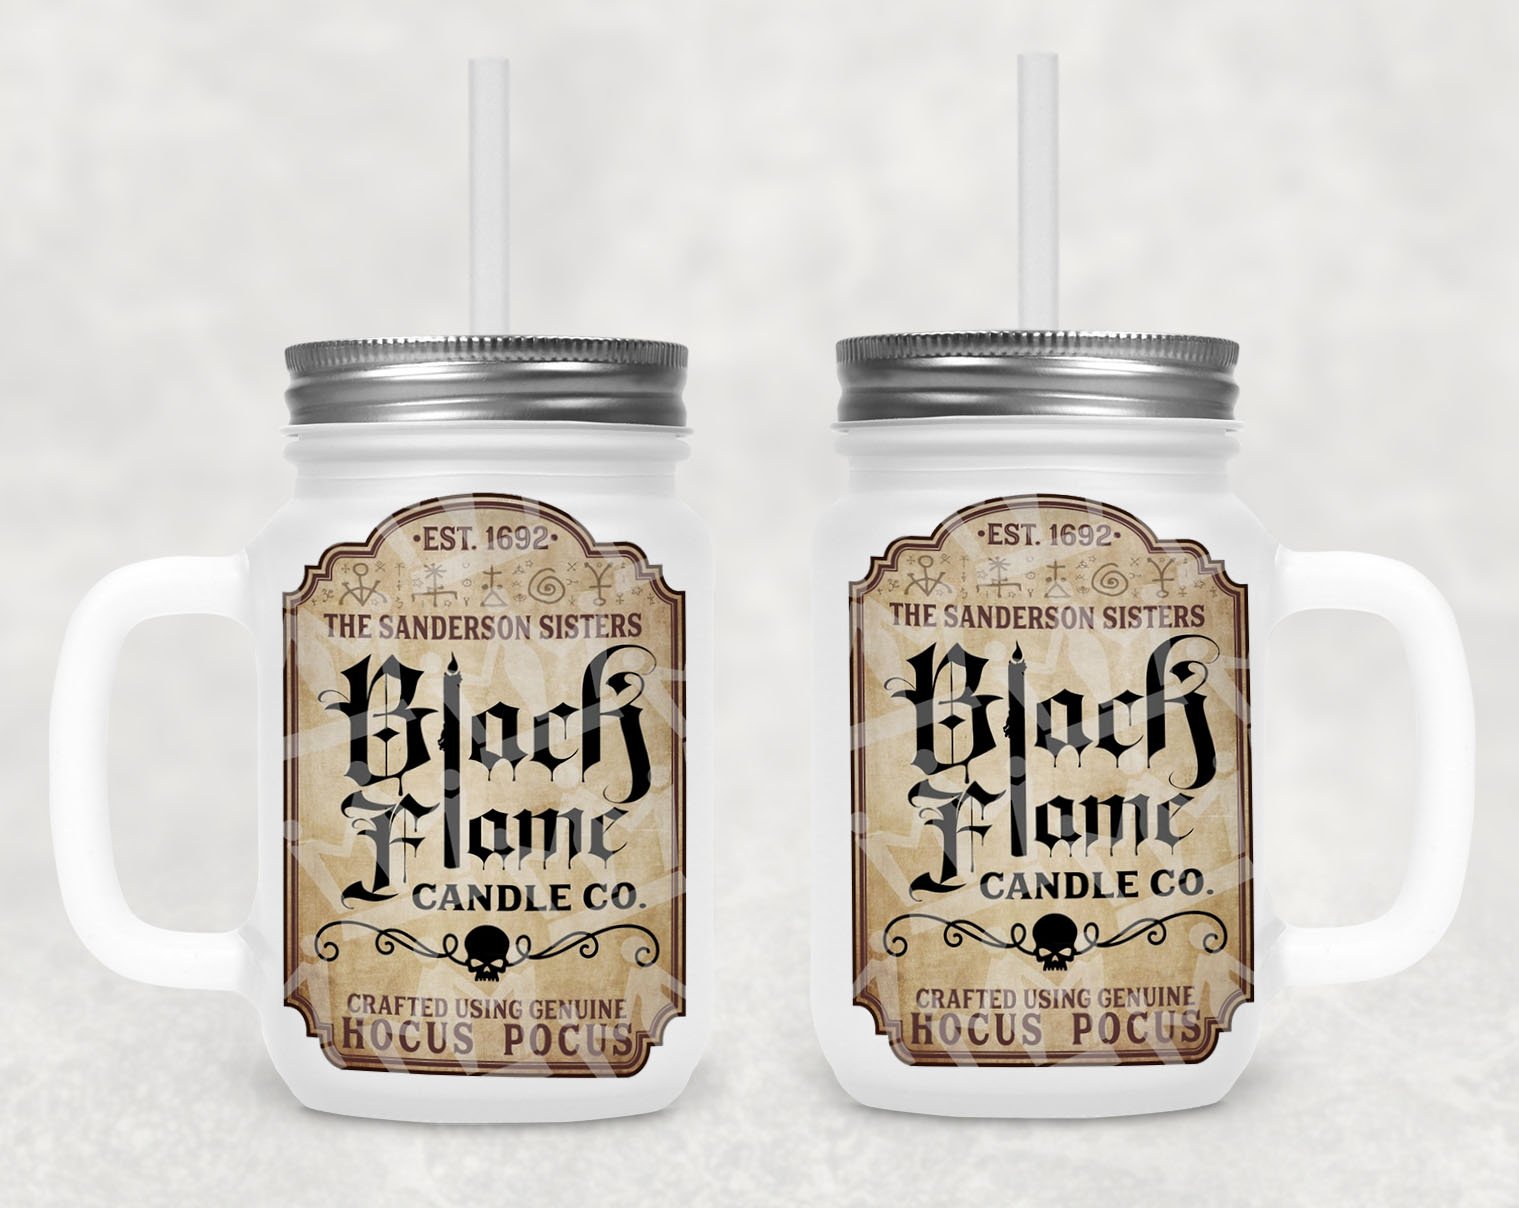 Black Flame Candle Co Frosted Mason Jar